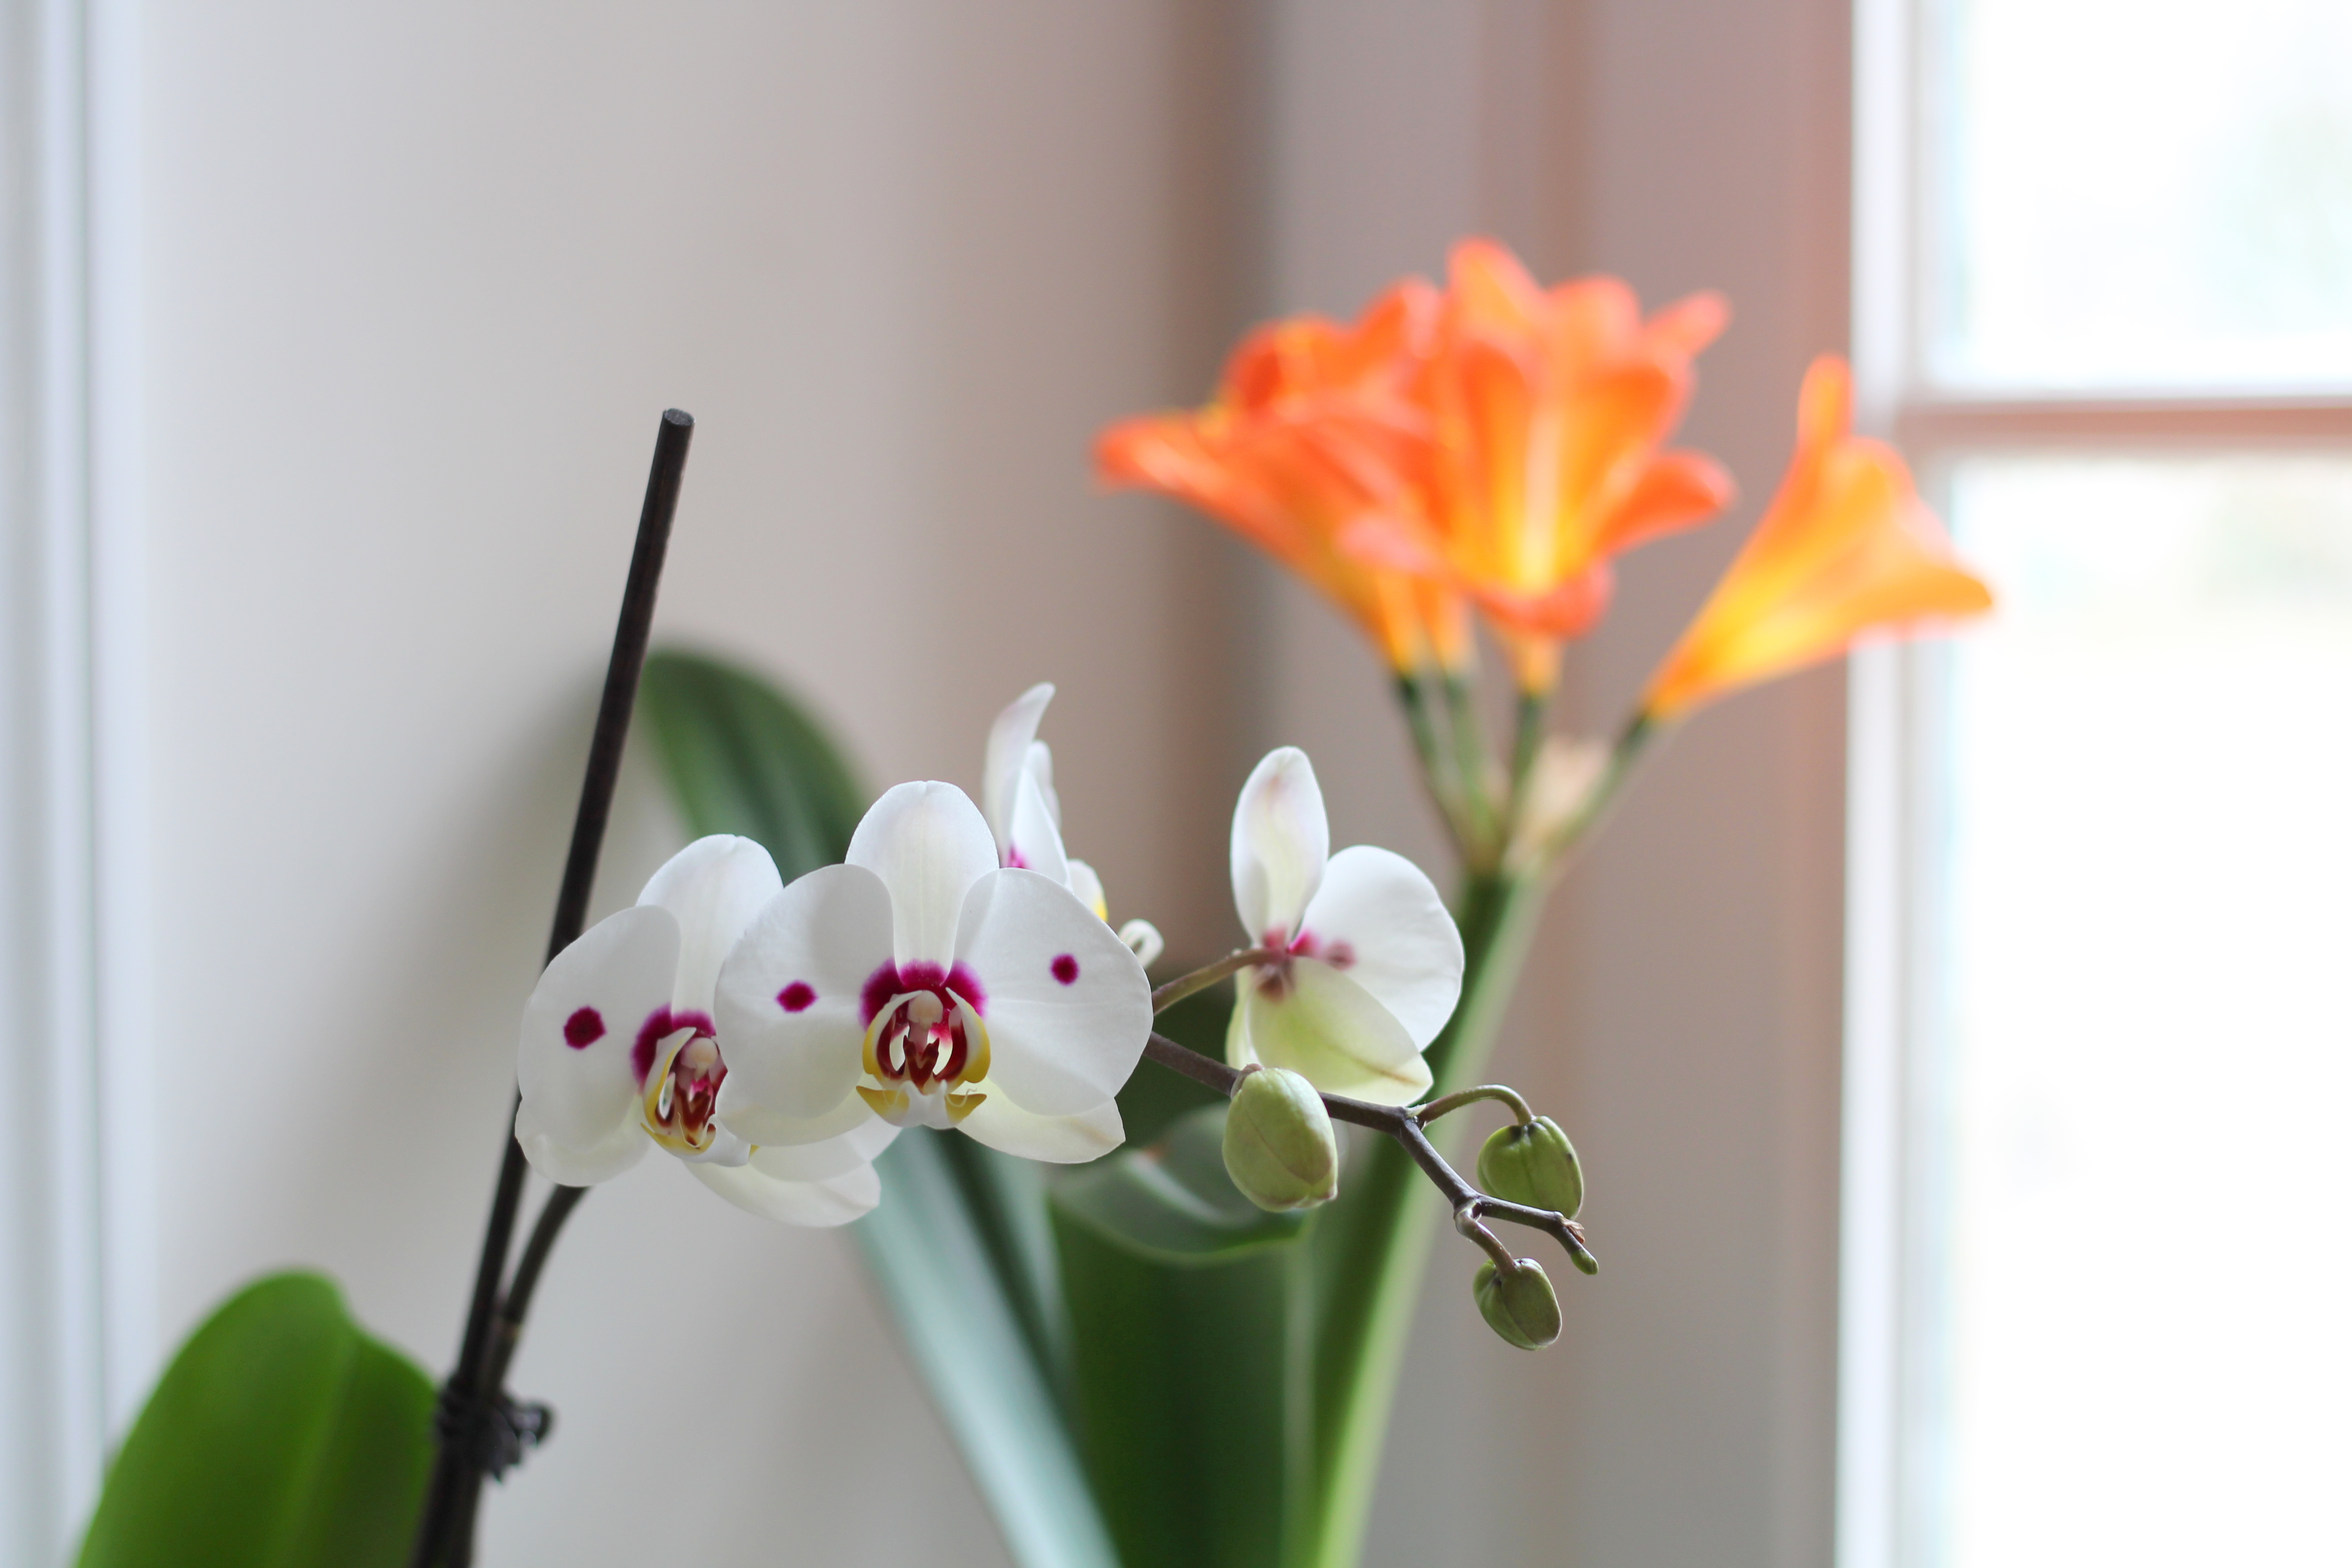 Phalaenopsis orchid and clivia blossomed in spring 2020 in Michigan (taken on March 14, 2020). 